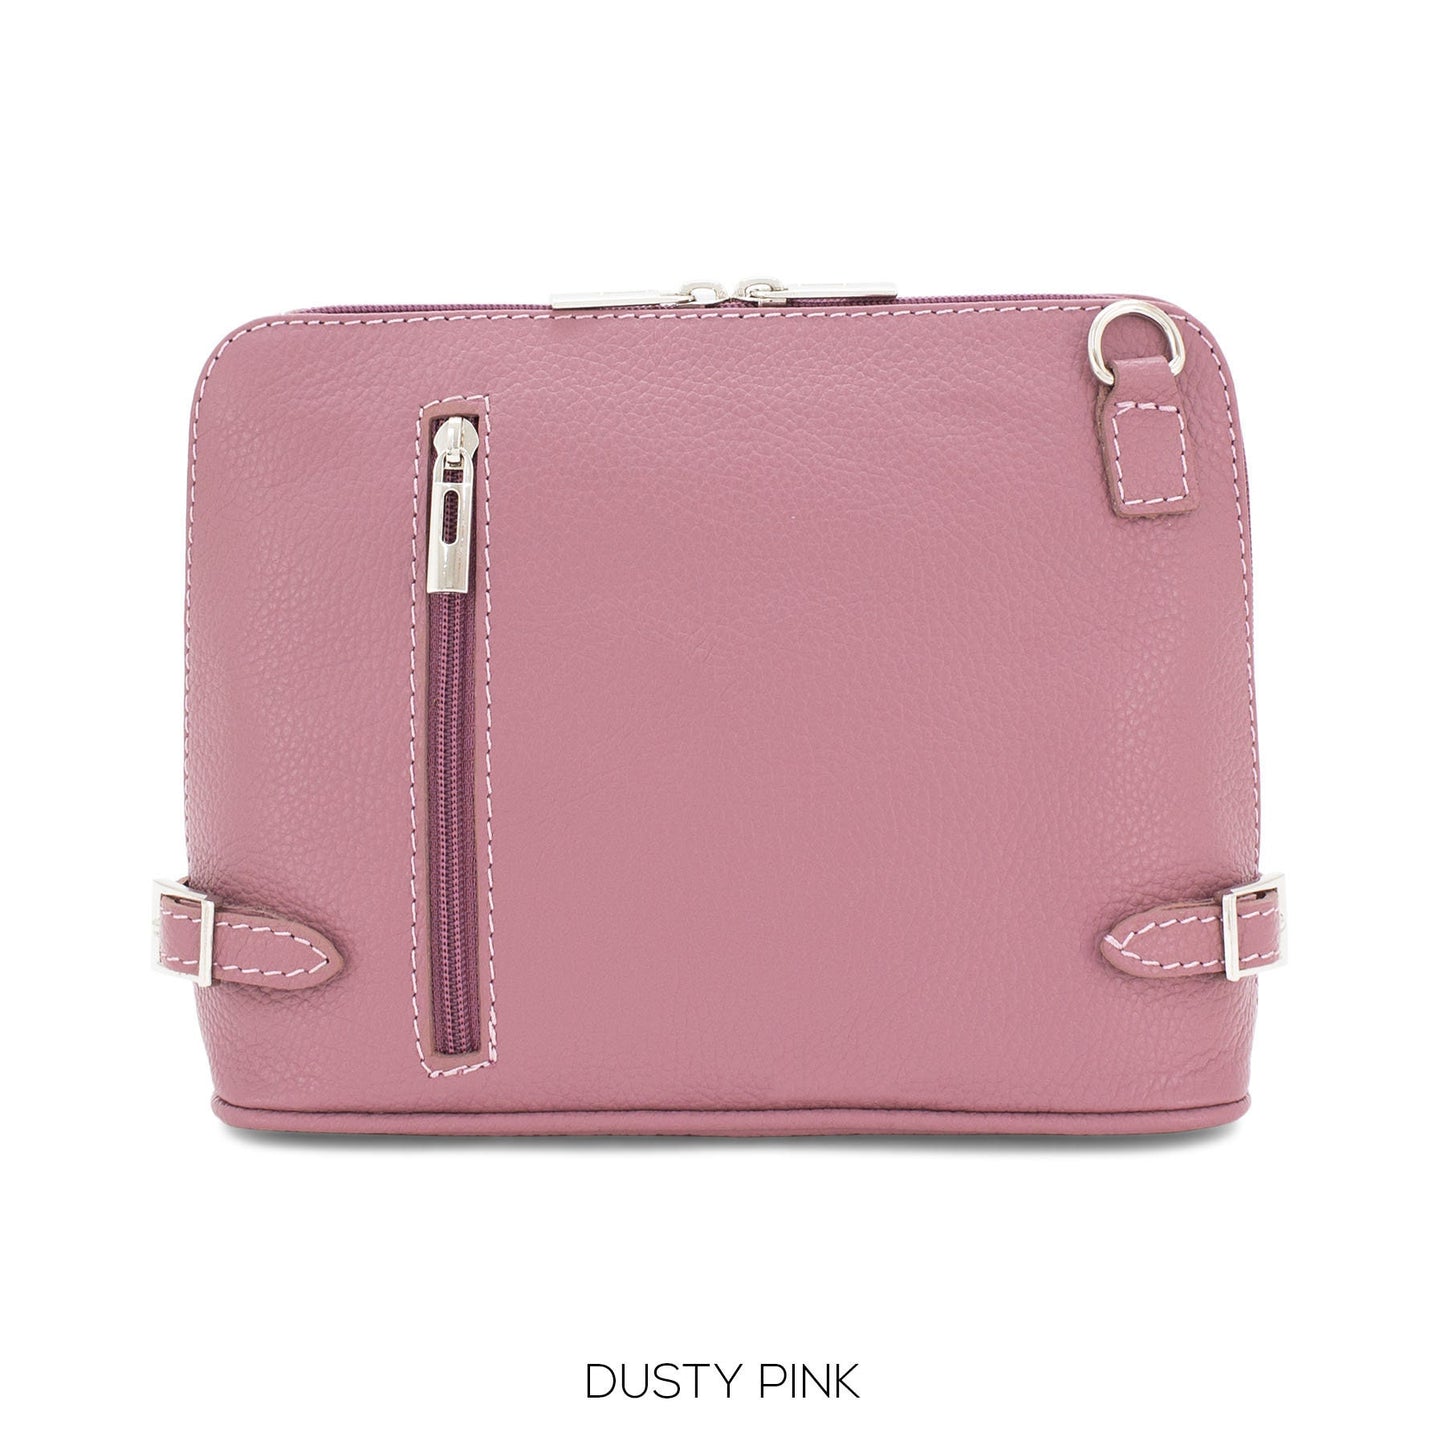 Genuine Leather Crossbody Bag Leather Crossbody with Side Buckles Real Italian Leather Small Crossbody Shoulder Bag Cute Small Elegant Bag